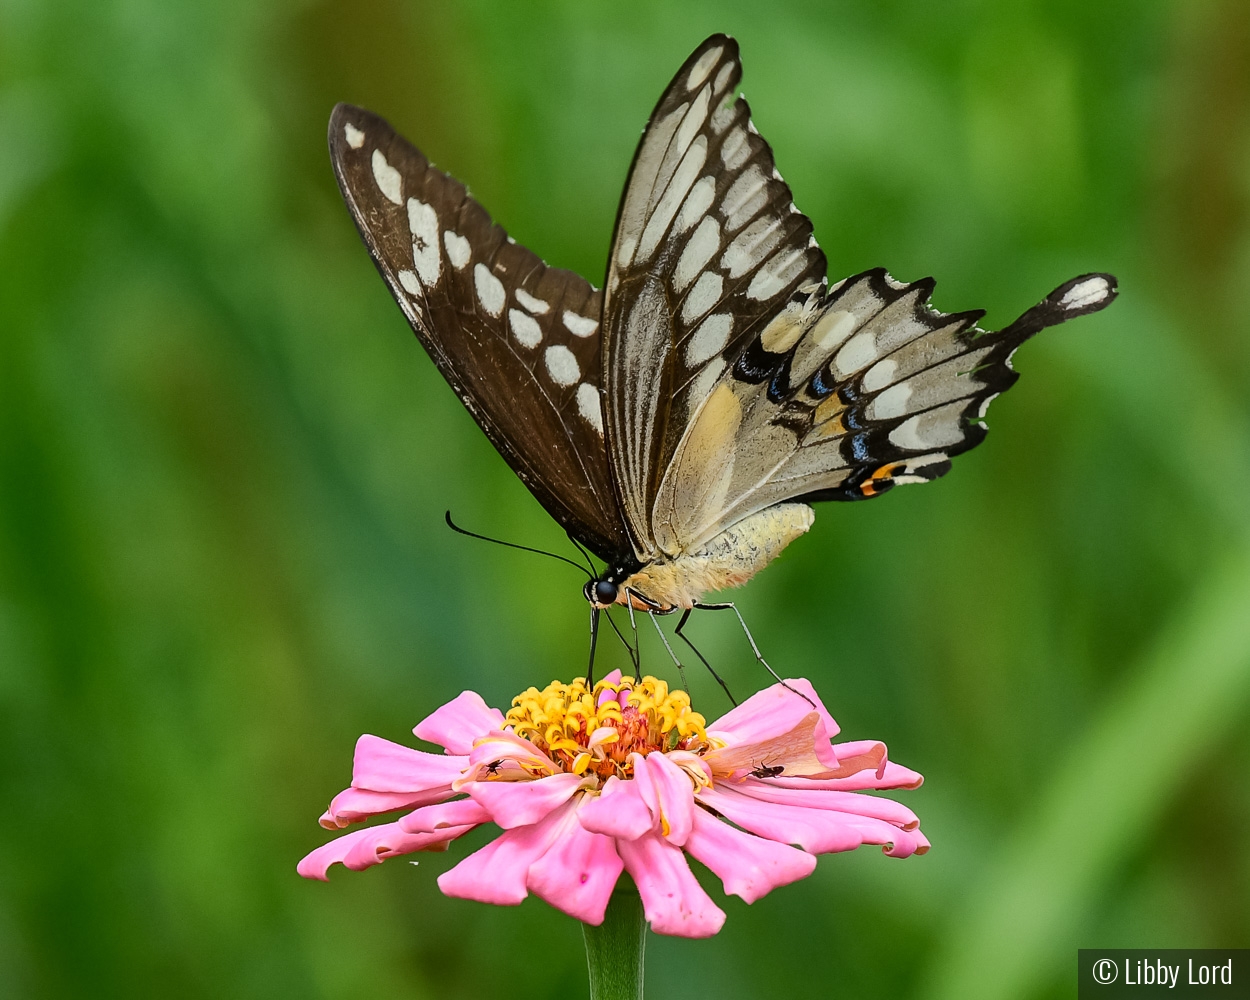 Giant Eastern Swallowtail by Libby Lord